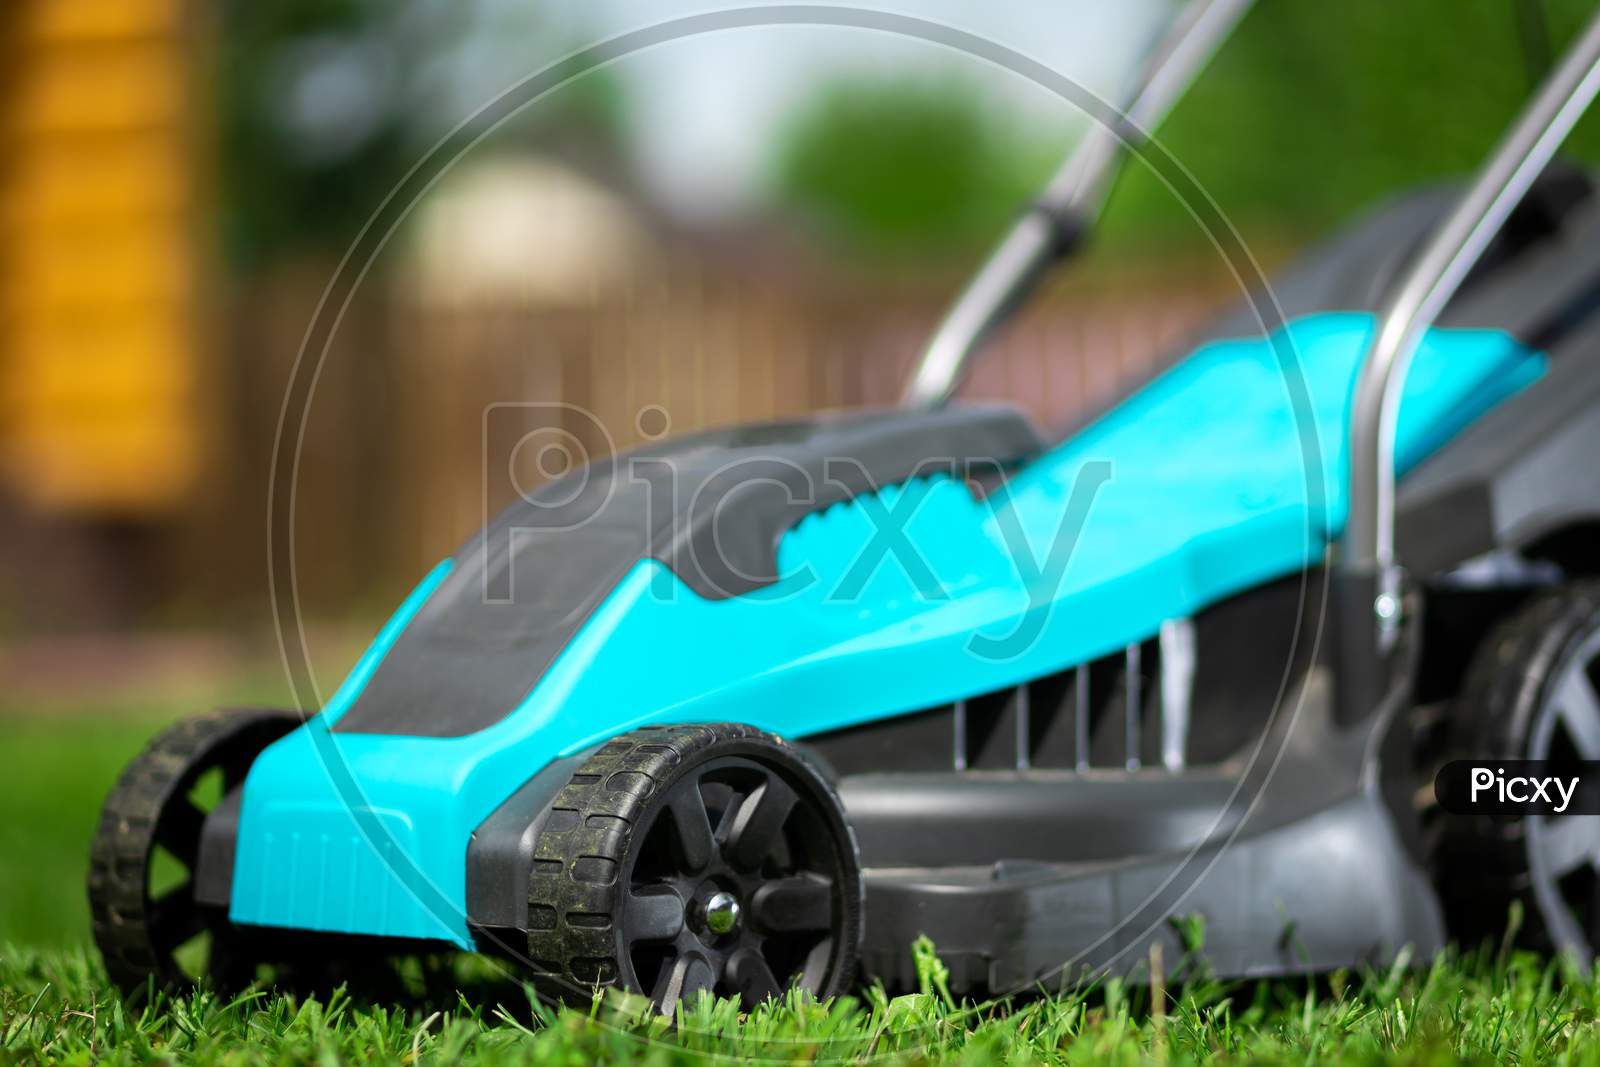 Close Up Of The  Electric Lawn Mower Mowing The Lawn. Pruning And Landscaping A Garden, Cutting Grass, Lawn, Paths